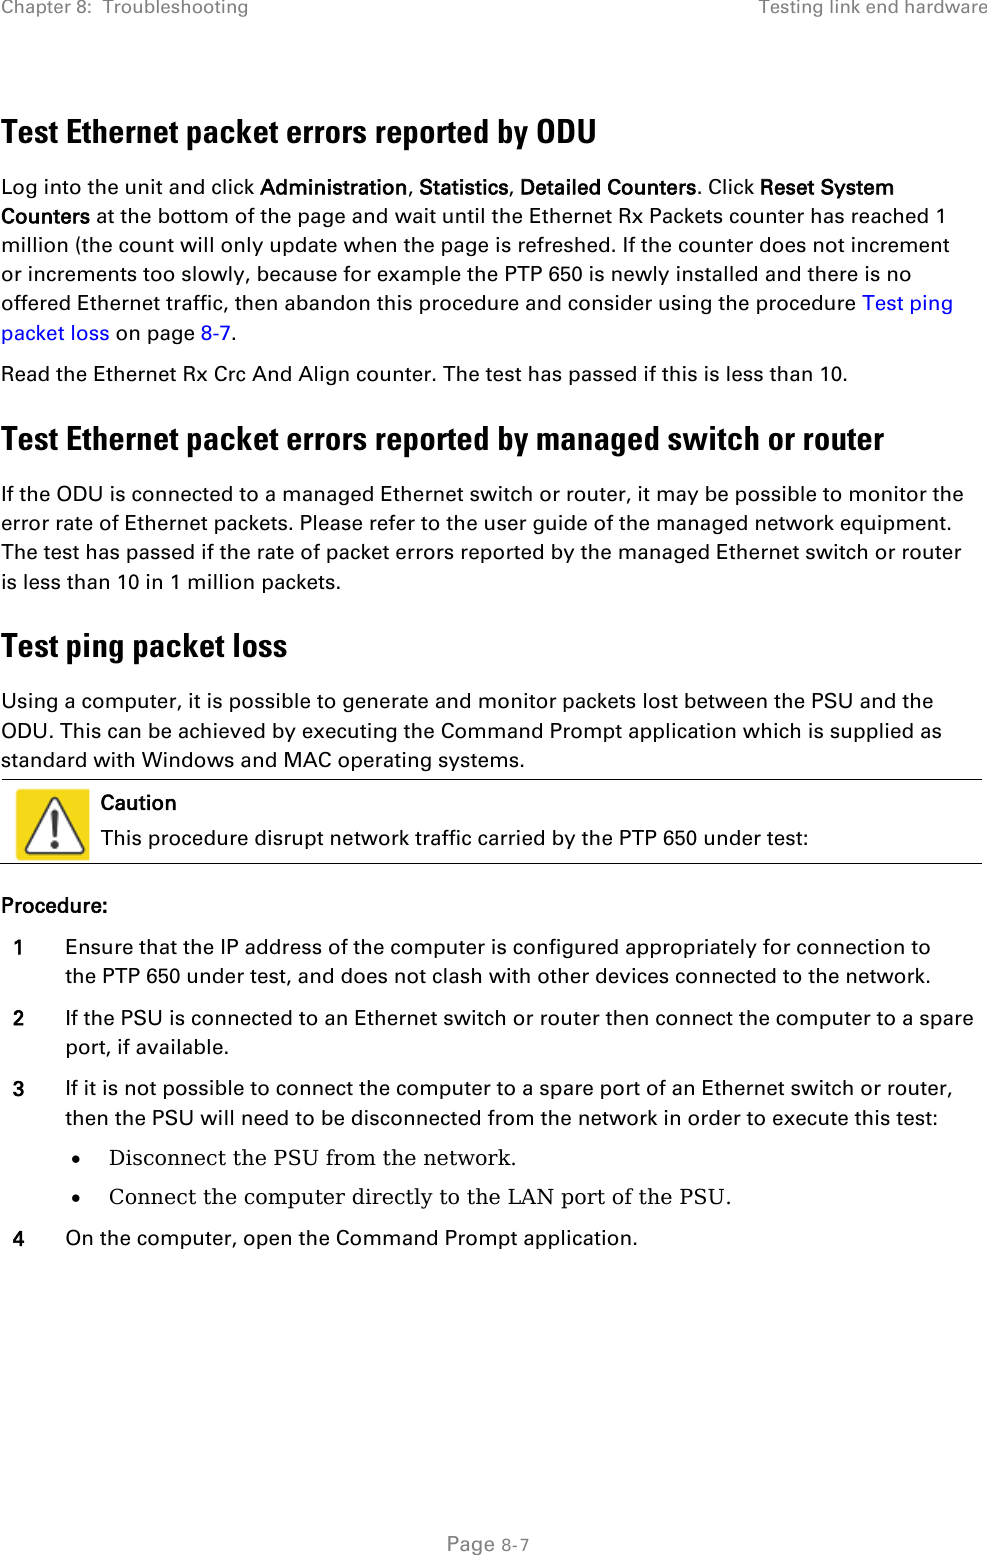 Chapter 8:  Troubleshooting Testing link end hardware  Test Ethernet packet errors reported by ODU Log into the unit and click Administration, Statistics, Detailed Counters. Click Reset System Counters at the bottom of the page and wait until the Ethernet Rx Packets counter has reached 1 million (the count will only update when the page is refreshed. If the counter does not increment or increments too slowly, because for example the PTP 650 is newly installed and there is no offered Ethernet traffic, then abandon this procedure and consider using the procedure Test ping packet loss on page 8-7. Read the Ethernet Rx Crc And Align counter. The test has passed if this is less than 10. Test Ethernet packet errors reported by managed switch or router If the ODU is connected to a managed Ethernet switch or router, it may be possible to monitor the error rate of Ethernet packets. Please refer to the user guide of the managed network equipment. The test has passed if the rate of packet errors reported by the managed Ethernet switch or router is less than 10 in 1 million packets. Test ping packet loss Using a computer, it is possible to generate and monitor packets lost between the PSU and the ODU. This can be achieved by executing the Command Prompt application which is supplied as standard with Windows and MAC operating systems.   Caution This procedure disrupt network traffic carried by the PTP 650 under test: Procedure: 1 Ensure that the IP address of the computer is configured appropriately for connection to the PTP 650 under test, and does not clash with other devices connected to the network. 2 If the PSU is connected to an Ethernet switch or router then connect the computer to a spare port, if available. 3 If it is not possible to connect the computer to a spare port of an Ethernet switch or router, then the PSU will need to be disconnected from the network in order to execute this test: • Disconnect the PSU from the network. • Connect the computer directly to the LAN port of the PSU. 4 On the computer, open the Command Prompt application.   Page 8-7 